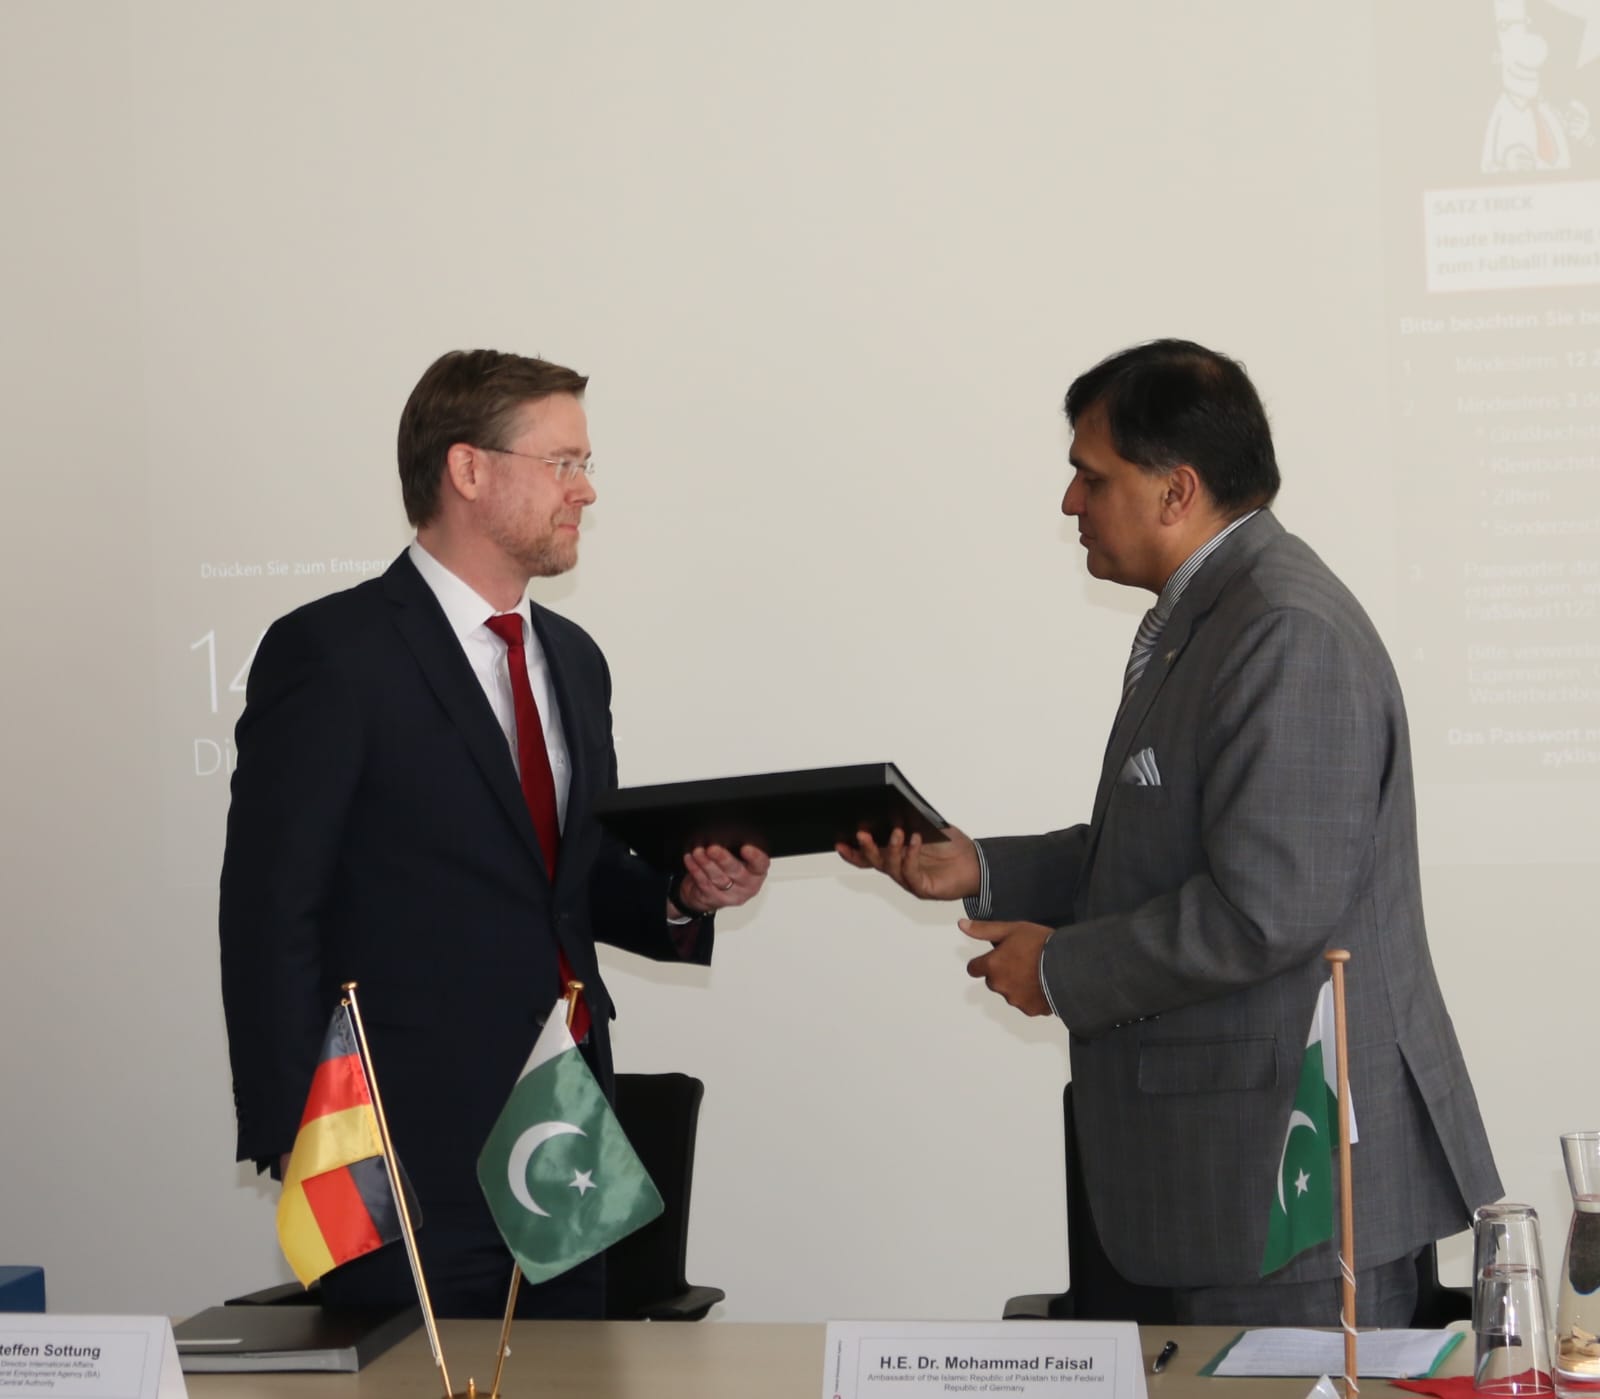 Ambassador Dr. Mohammad Faisal and Mr. Steffen Sottung, Managing Director signed a Letter of Intent (Lol) for Skilled Labour Mobility.